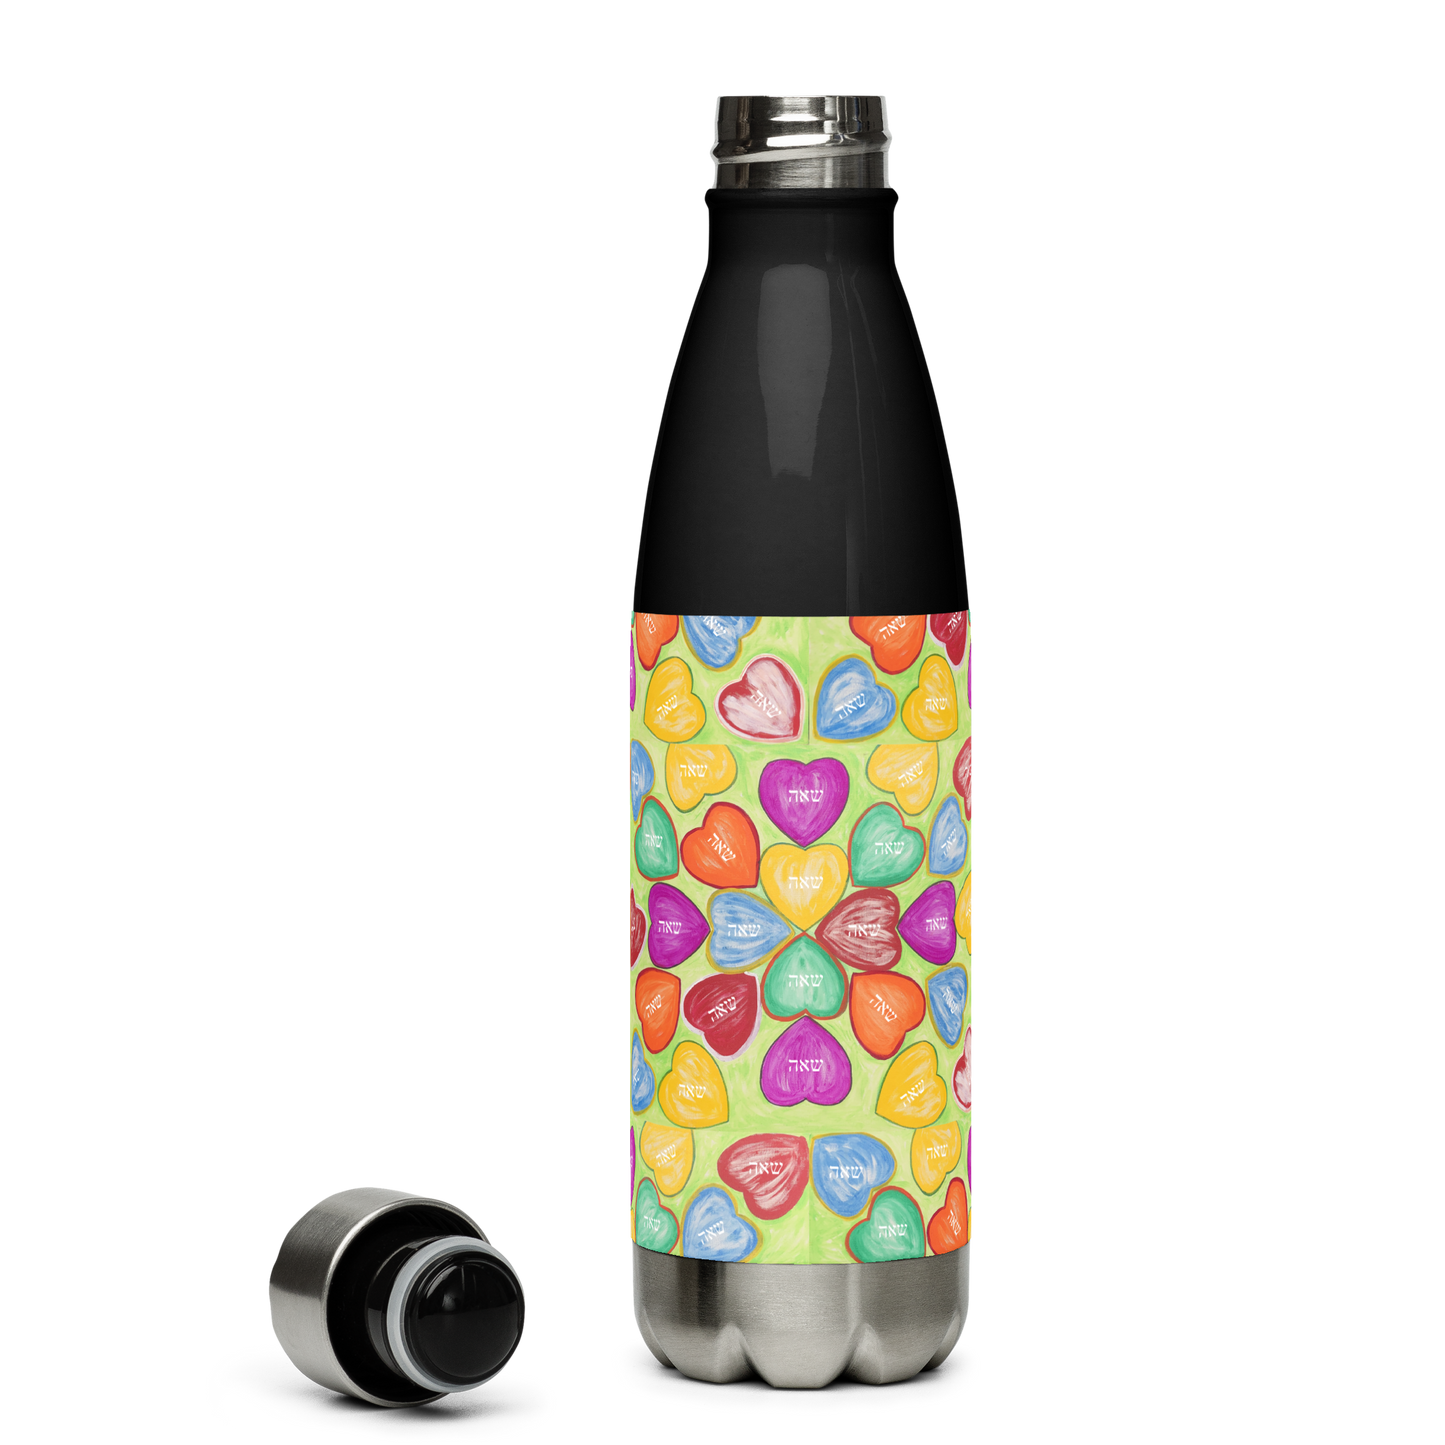  Stainless-Steel-Water-Bottle-17oz-Soulmate-(72-Names-of-God-ShinAleph-Yud)-2-137online.com